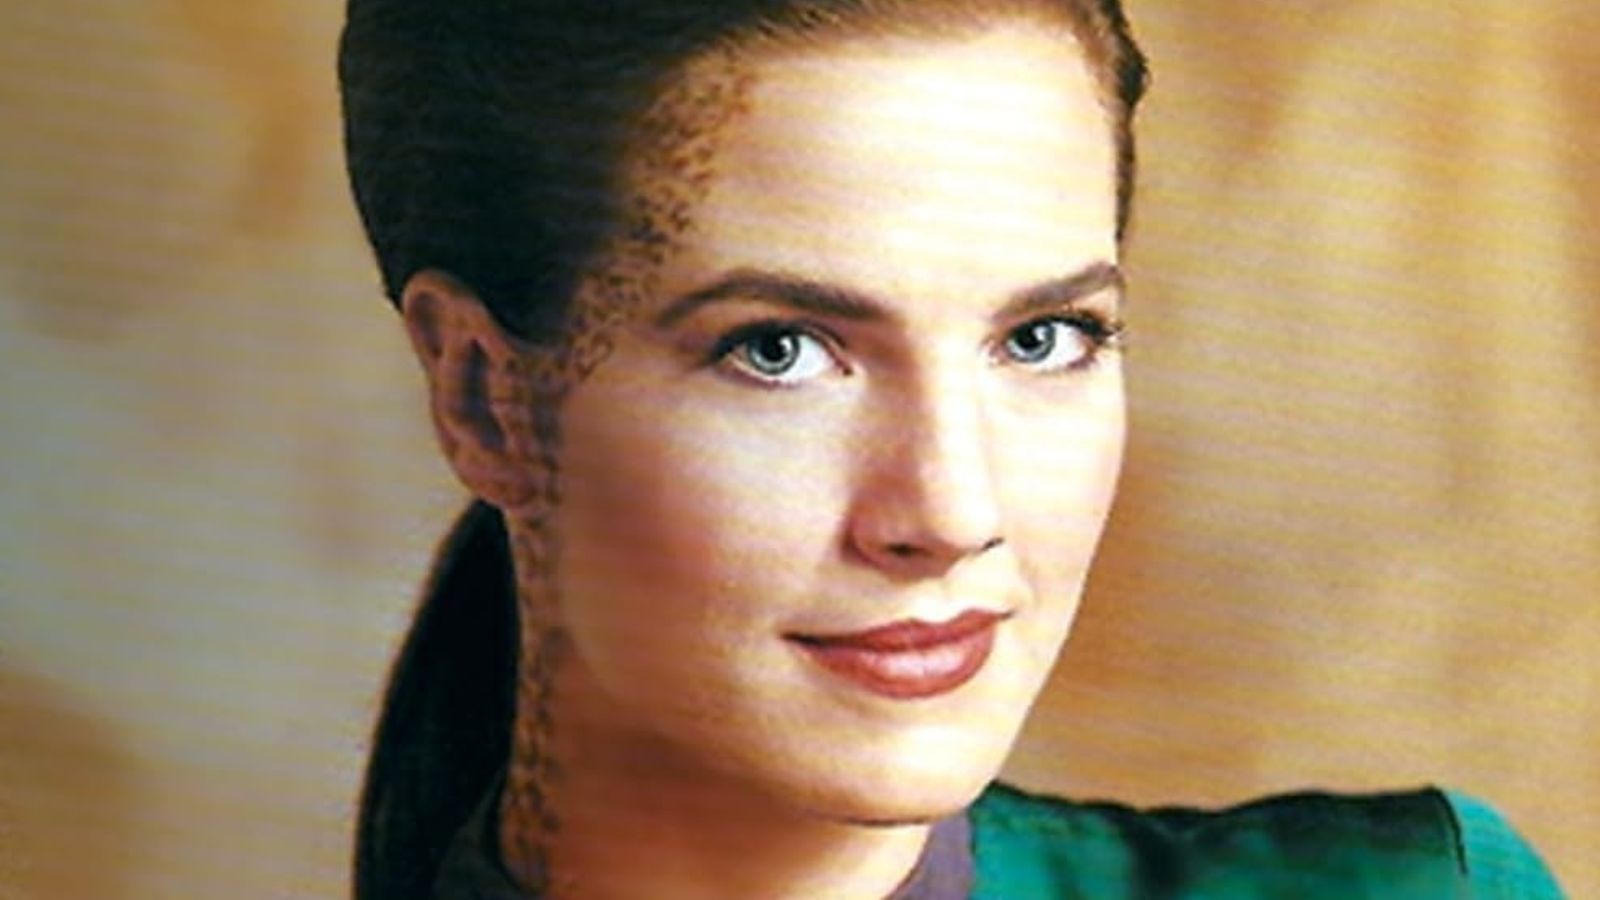 <span>Suppose we skip to the present-day installments of Star Trek. In that case, we can see more sexual and gender equality with same-sex relationship storylines, gender-fluid characters, and equal power-sharing amongst male and female crew members.</span>  <span>Furthermore, </span><a class="editor-rtfLink" href="https://www.imdb.com/title/tt12327578/" rel="noopener"><span>the current TV series Star Trek: Strange New Worlds</span></a><span> features Dr.Aspen, a non-binary humanitarian aid worker played by Keitel, a trans, non-binary actor. </span>  <span>So, just as the current Star Trek series reflects the values and culture of our time, we must appreciate that earlier series were reflective of these components within their time (even if it is light years away from 2024). </span>